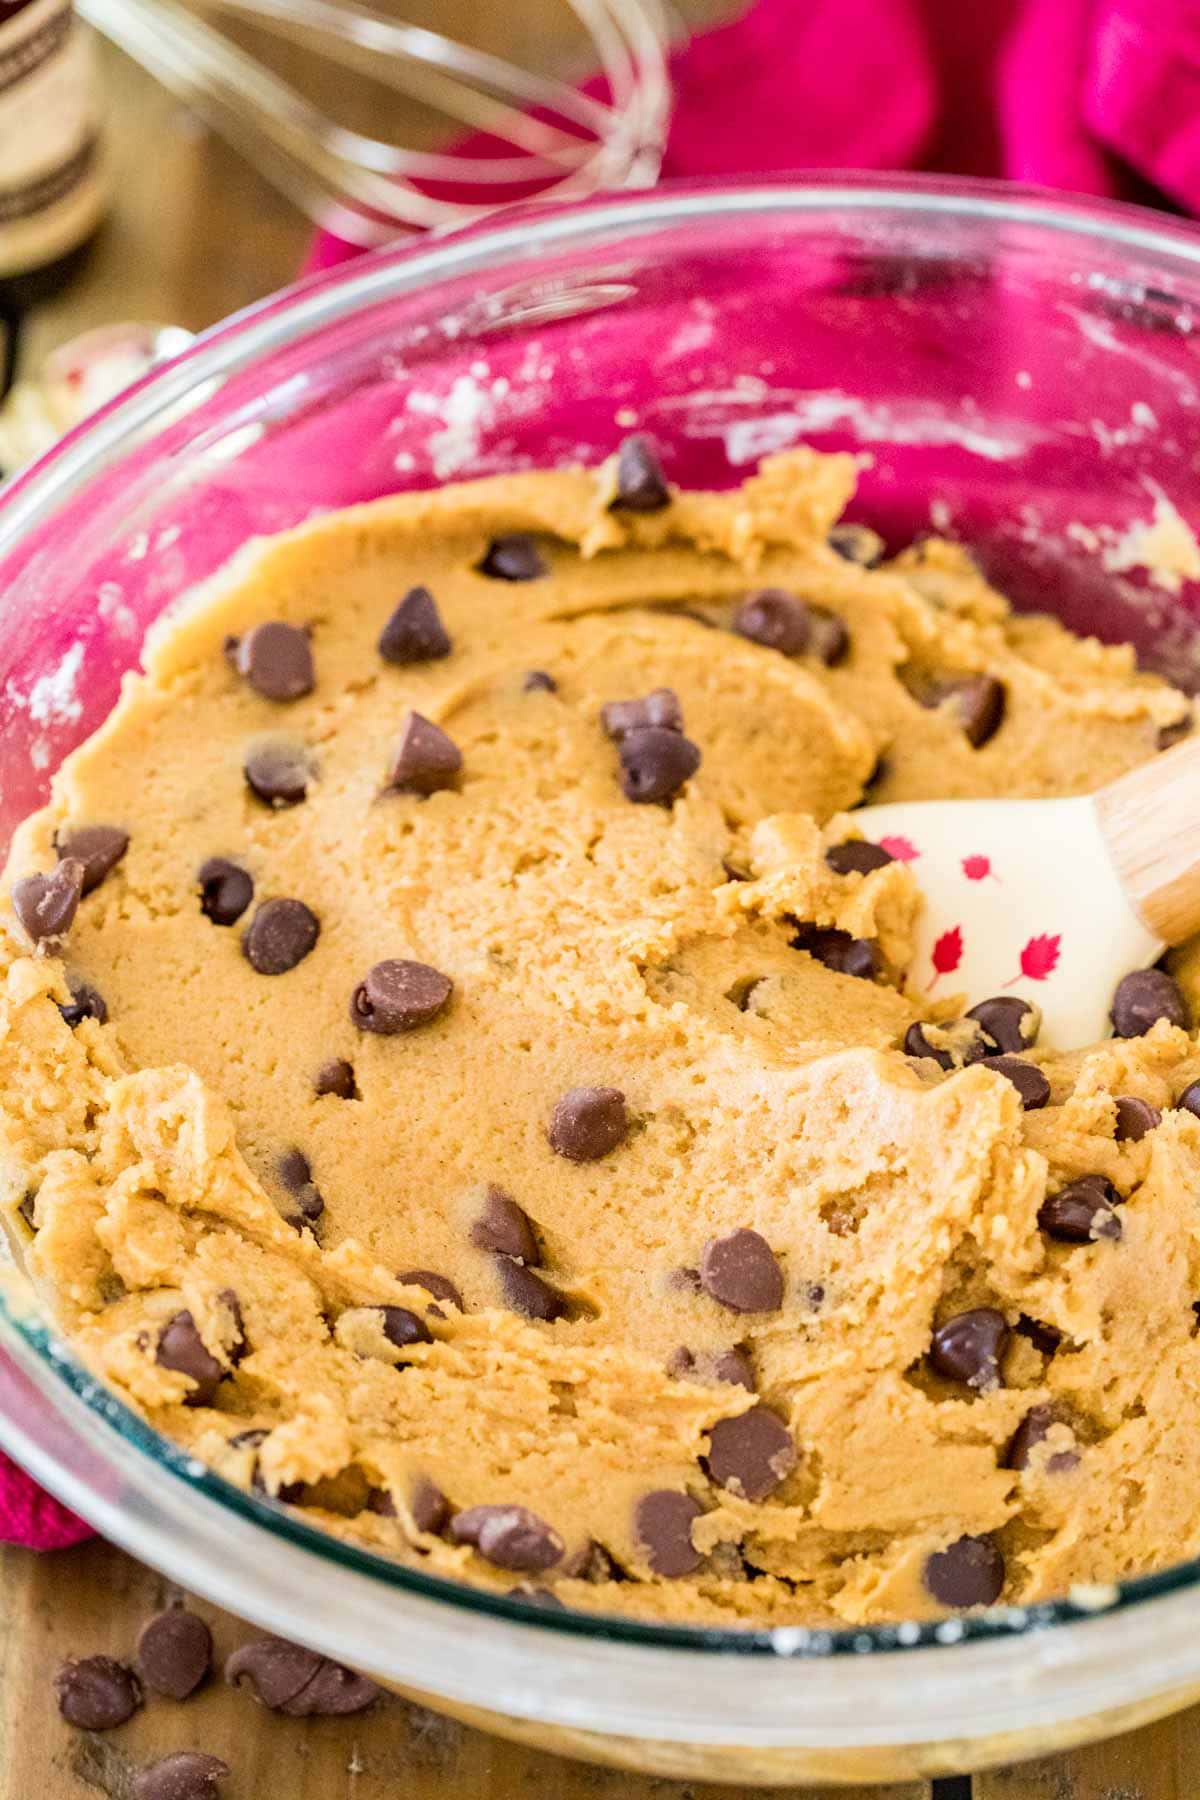 Pumpkin cookie dough with chocolate chips being stirred into it.